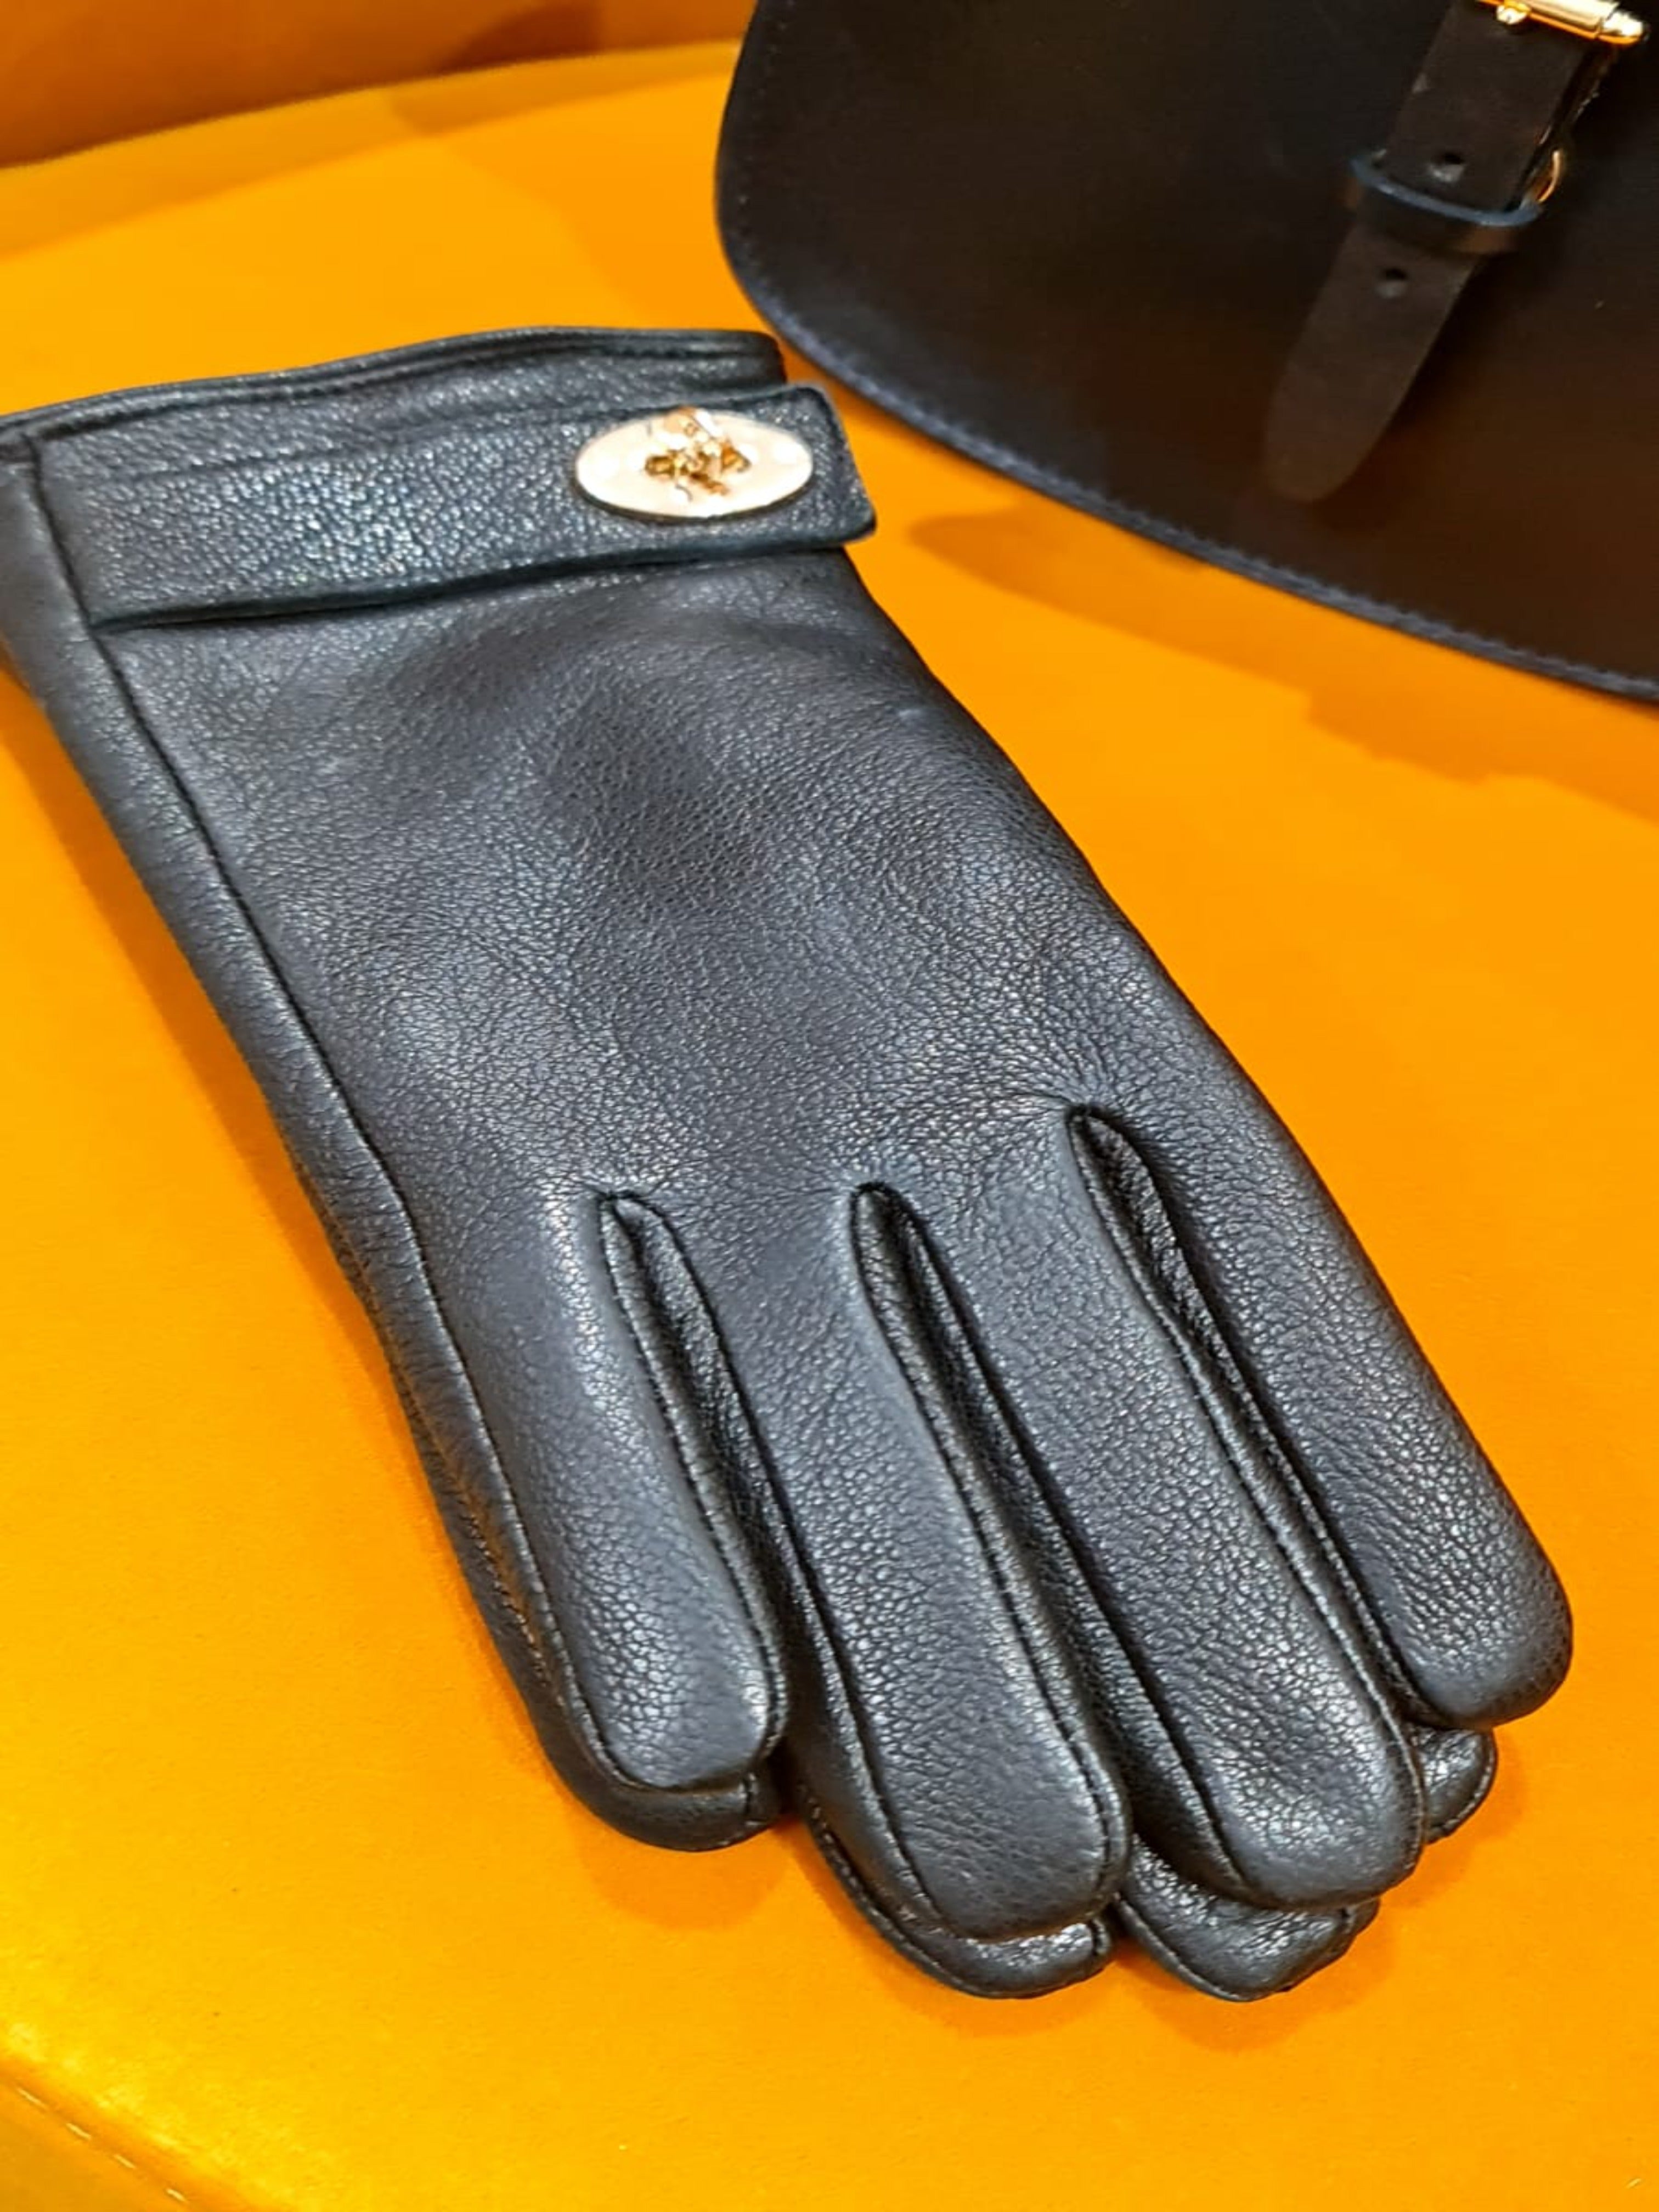 Black Leather Gloves with Gold Clasp